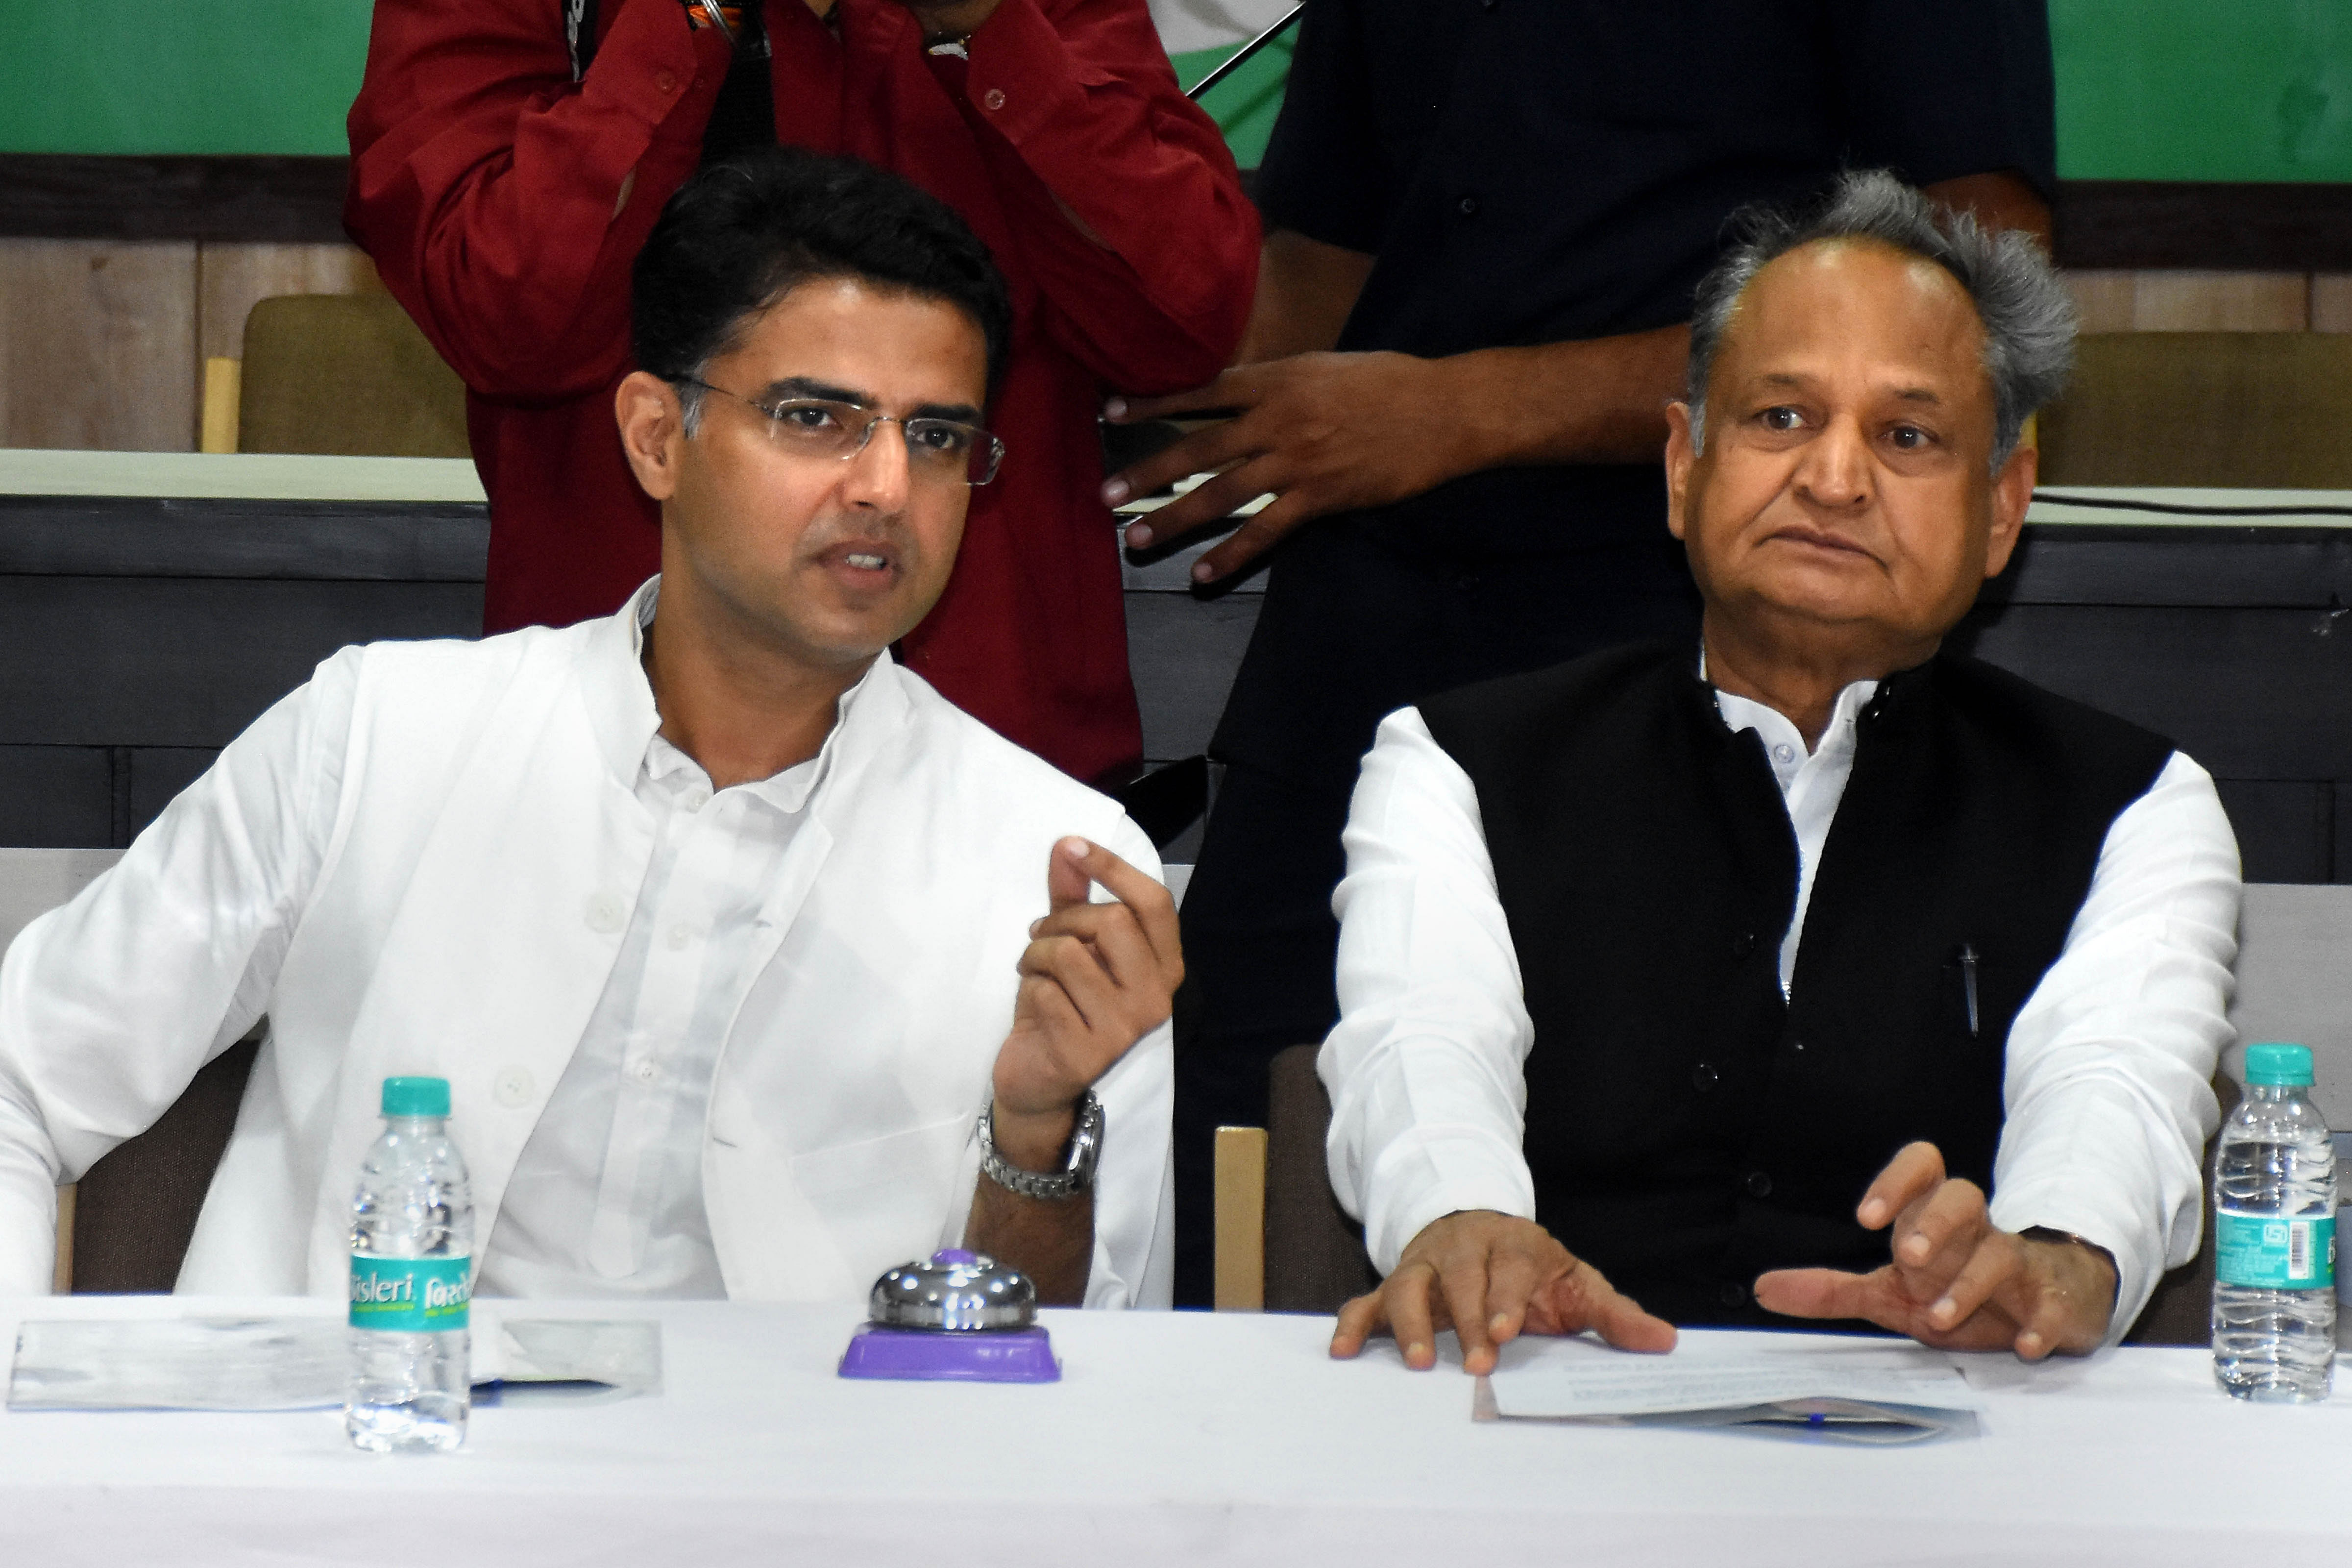 Rajasthan Chief Minister Ashok Gehlot with Deputy Chief Minister Sachin Pilot during a party committee meeting at Pradesh Congress Committee Headquarters, in Jaipur. (PTI Photo)